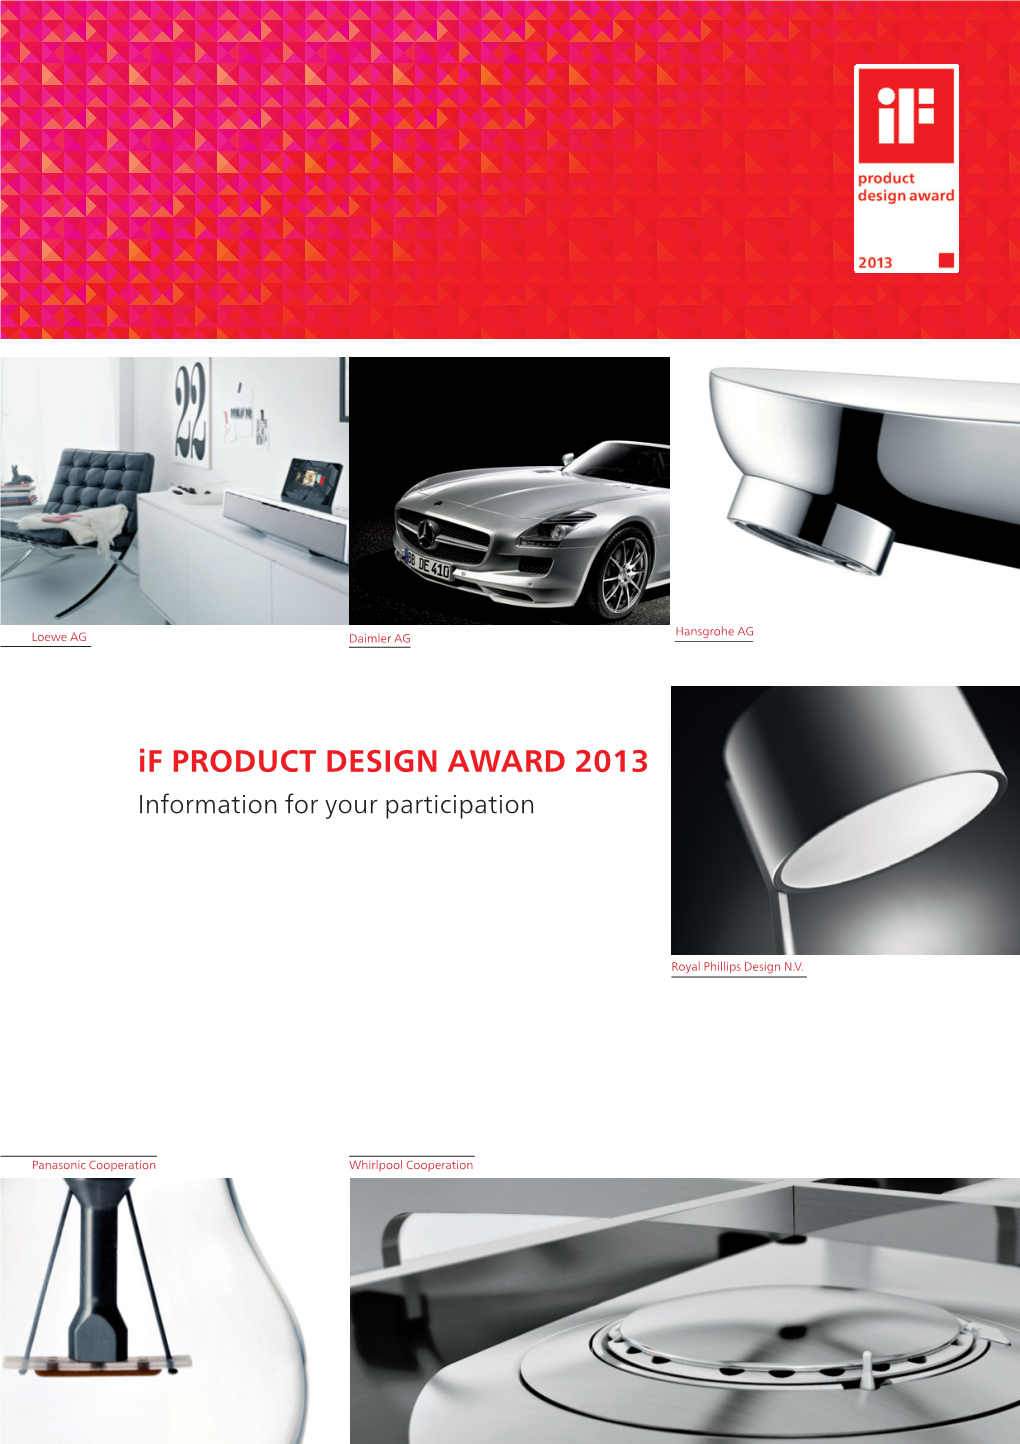 If PRODUCT DESIGN AWARD 2013 Information for Your Participation